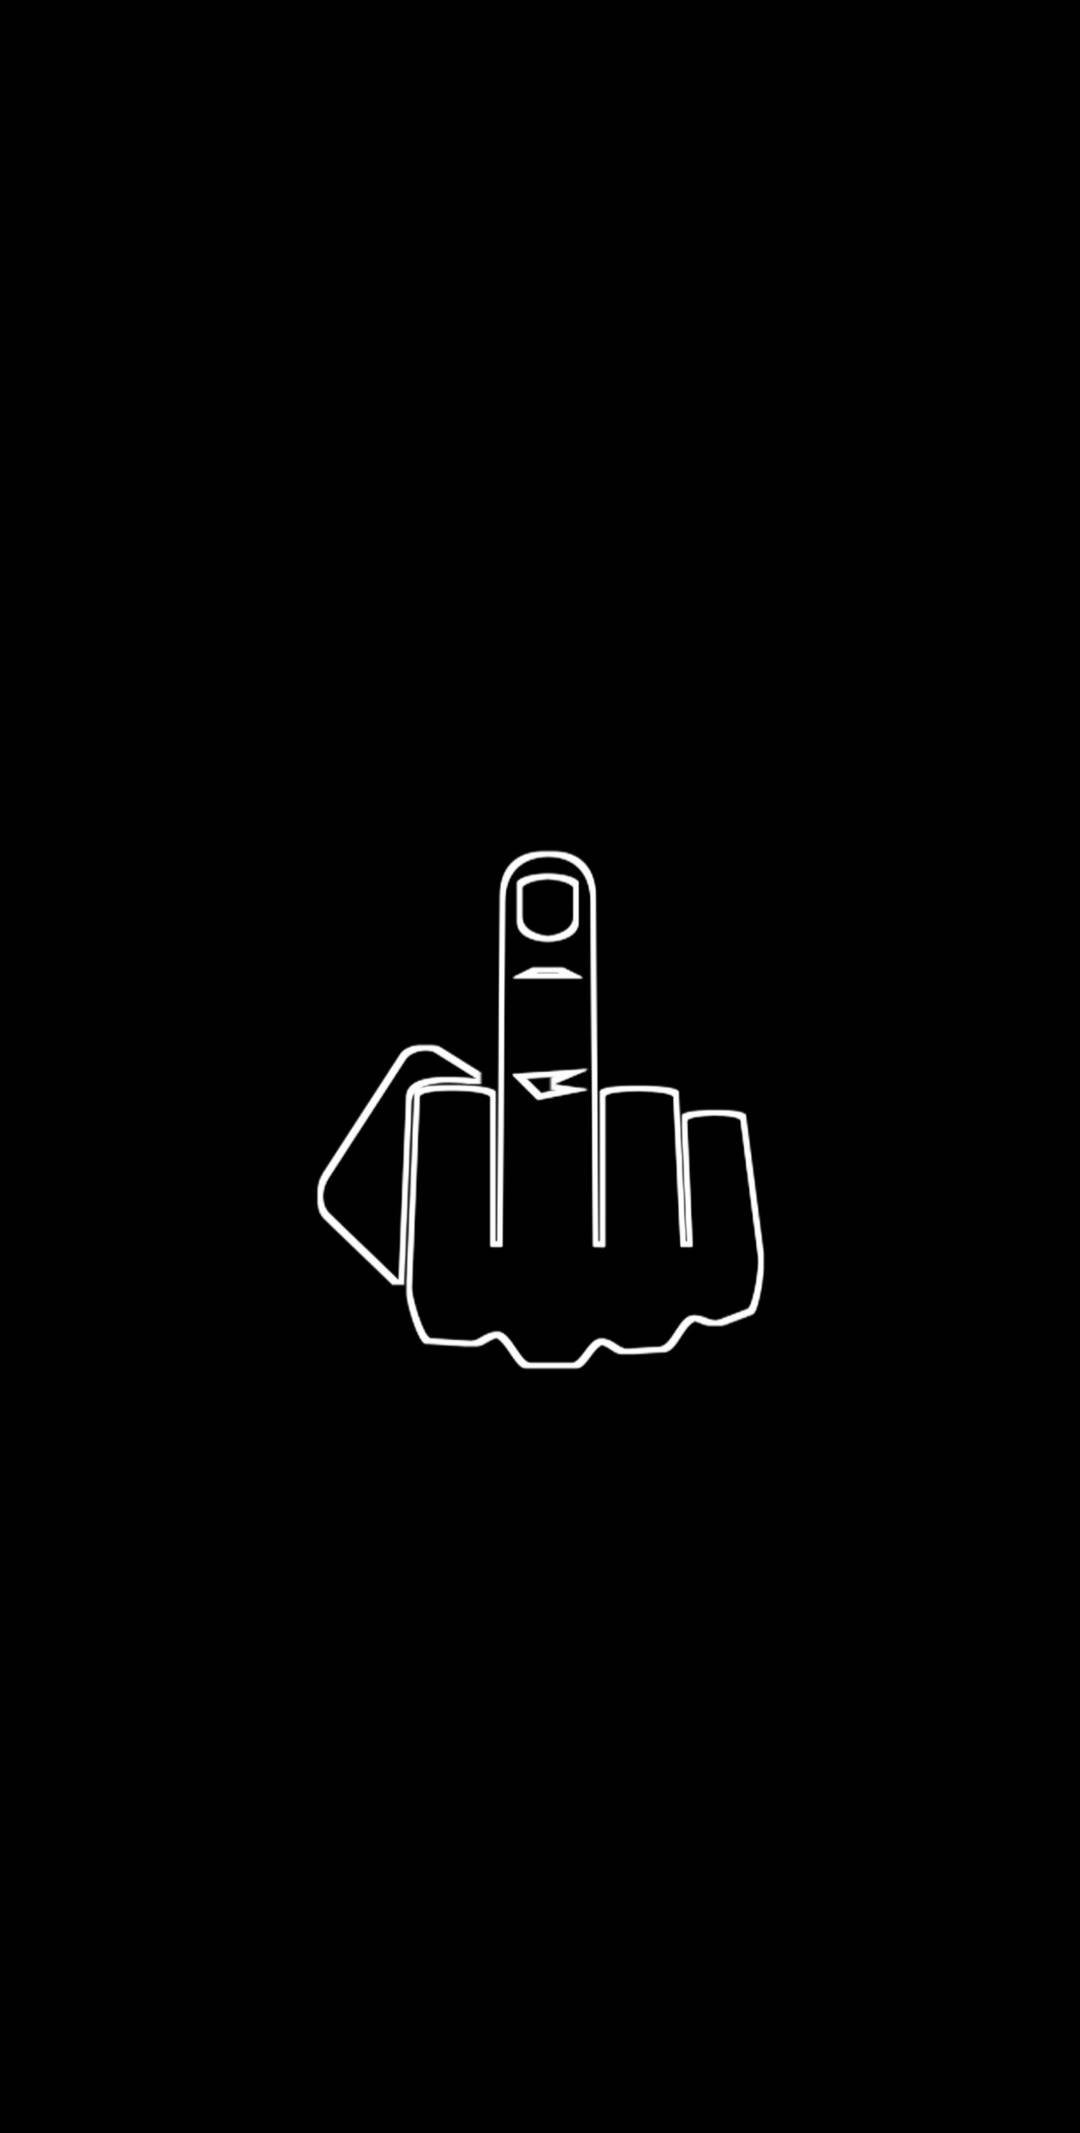 Middle Finger Photos Download The BEST Free Middle Finger Stock Photos   HD Images